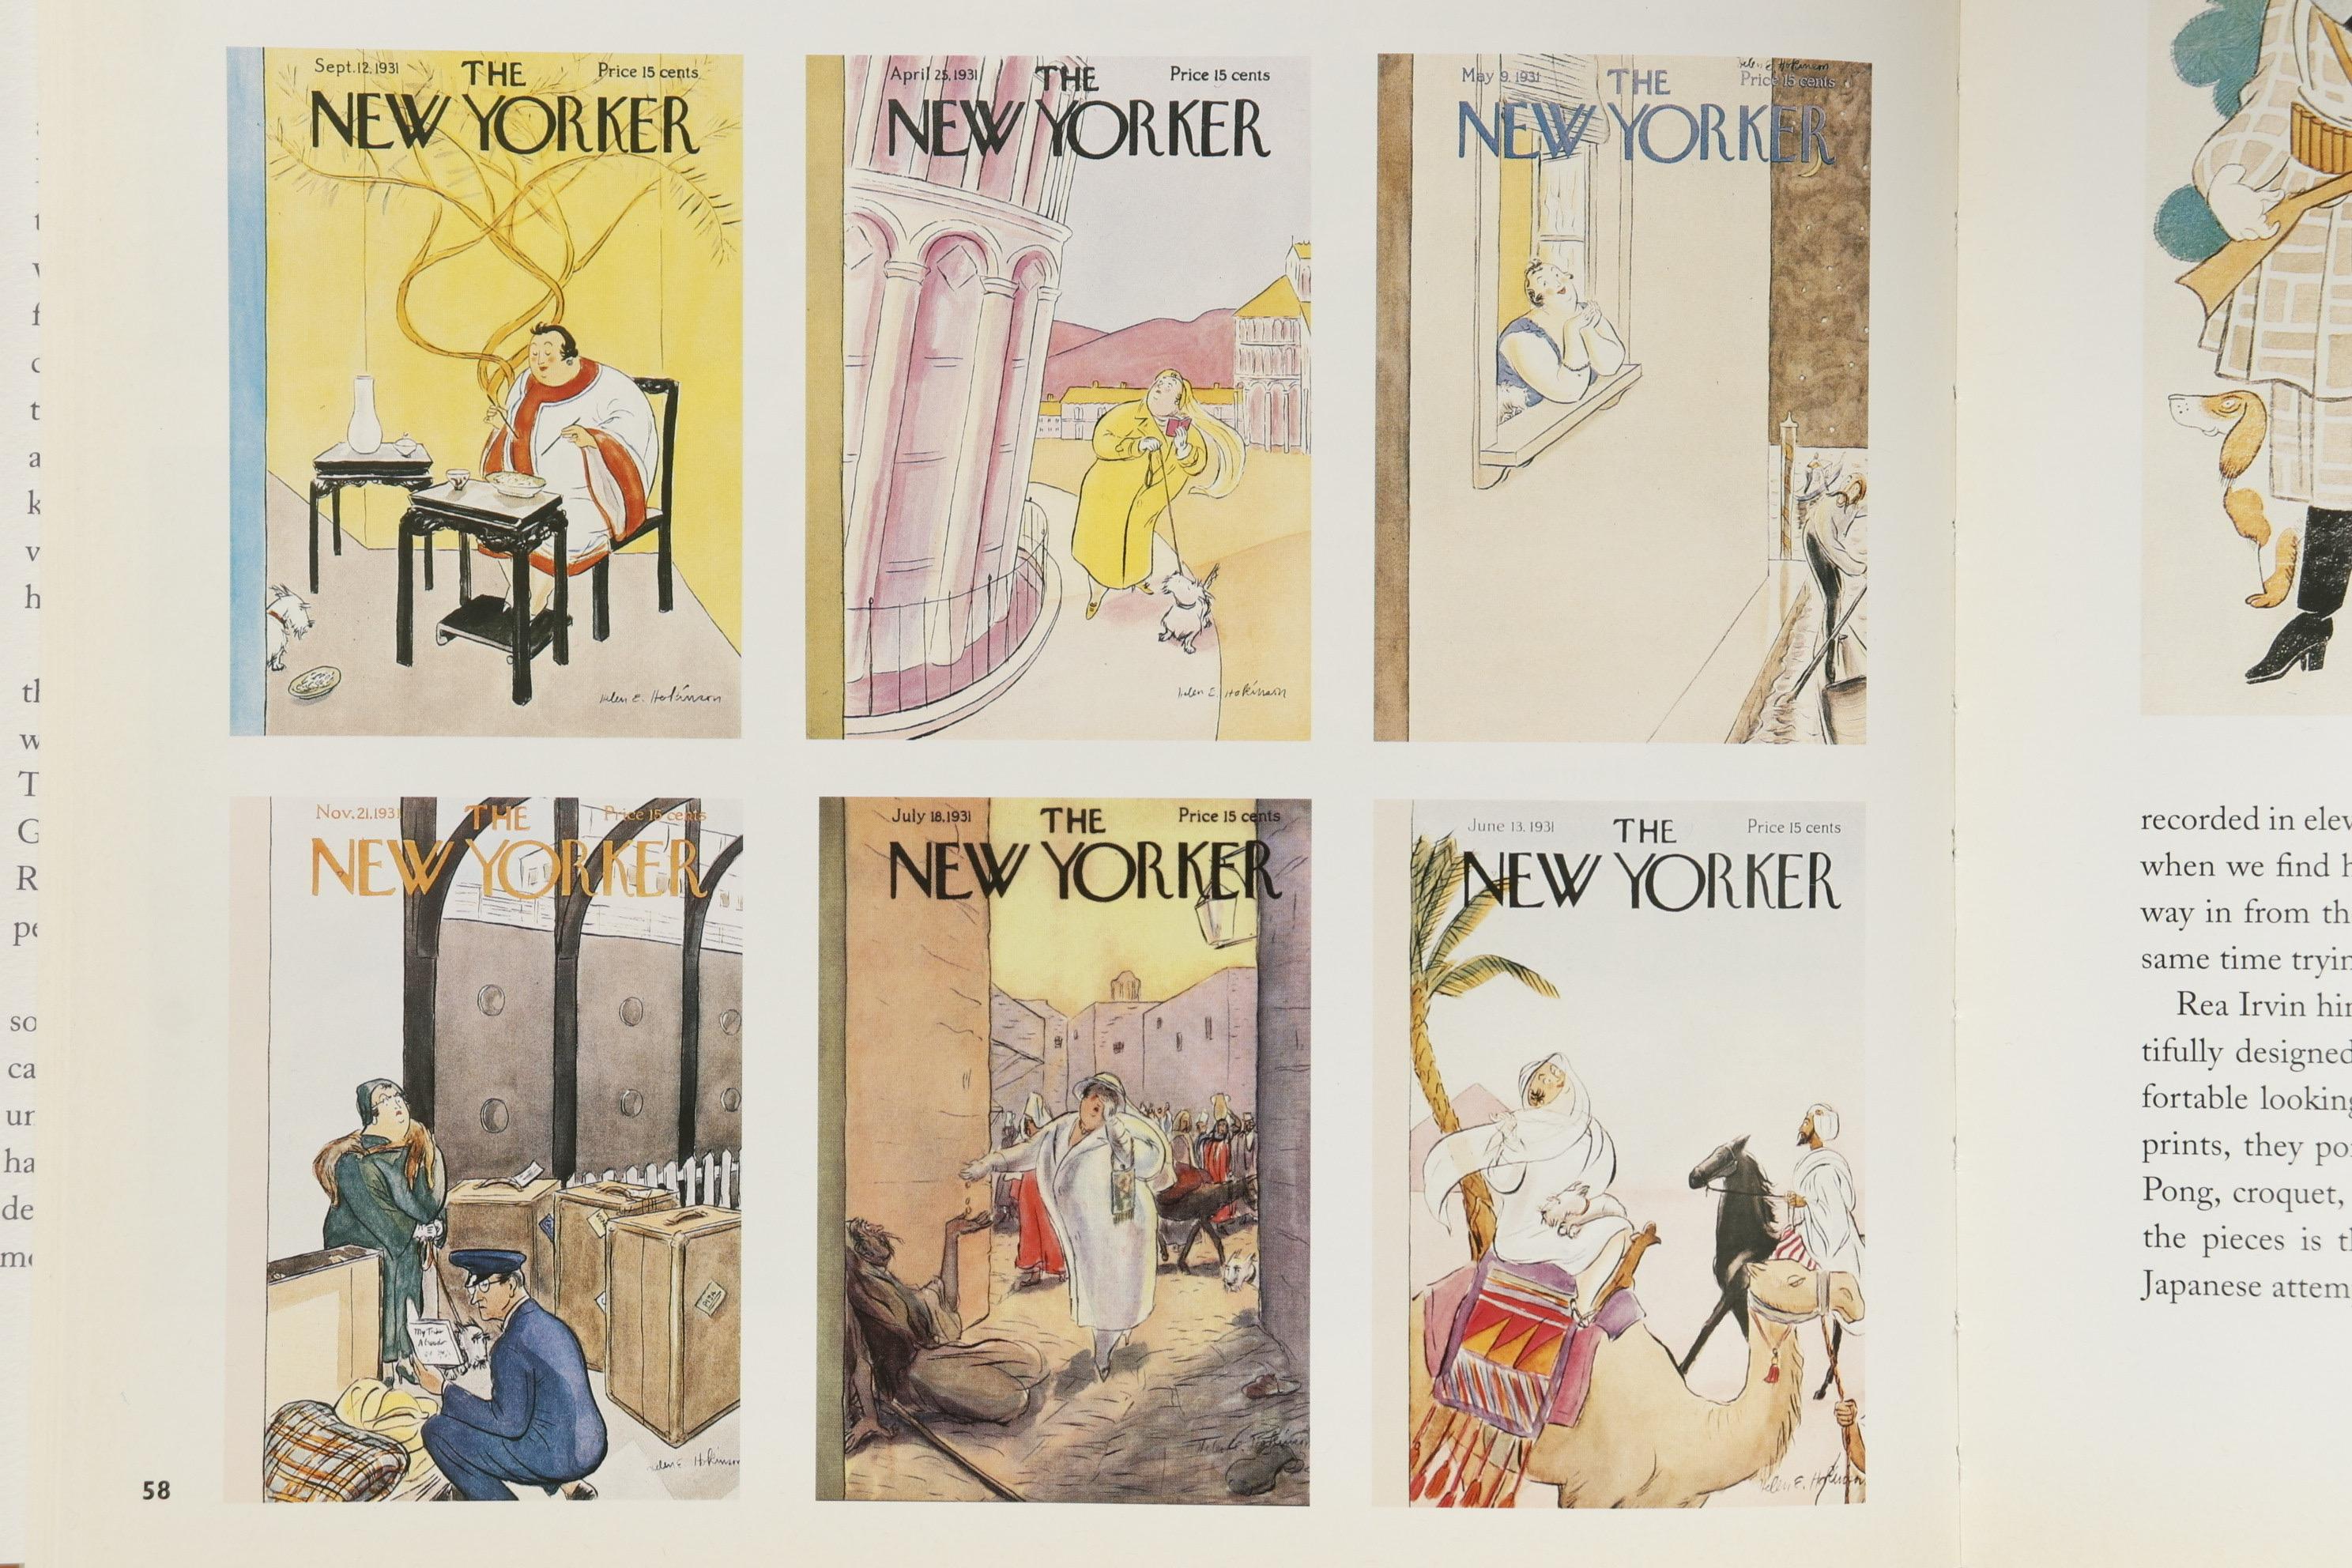 Paper The Art of the New Yorker 1925-1995 by Lee Lorenz For Sale